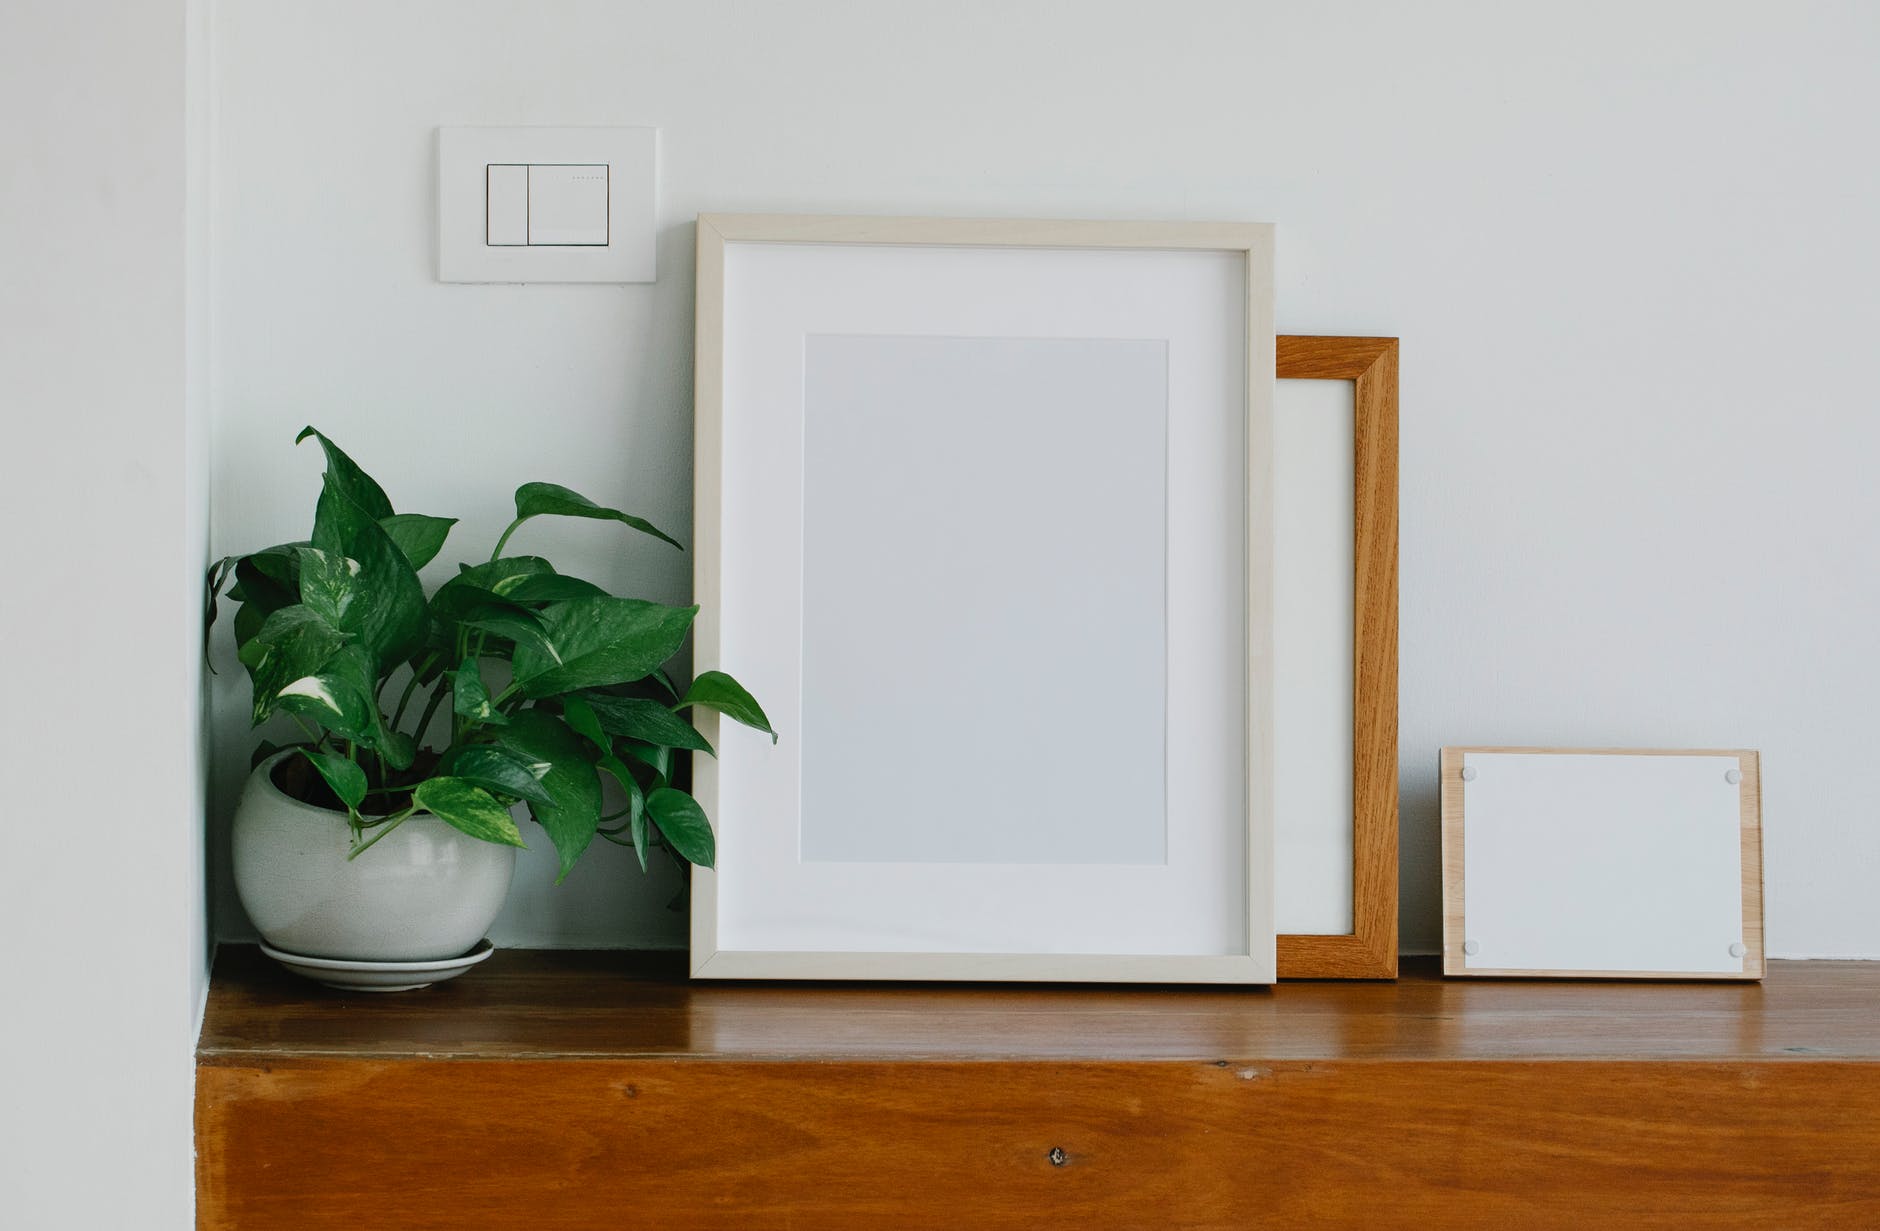 blank frames near potted plant